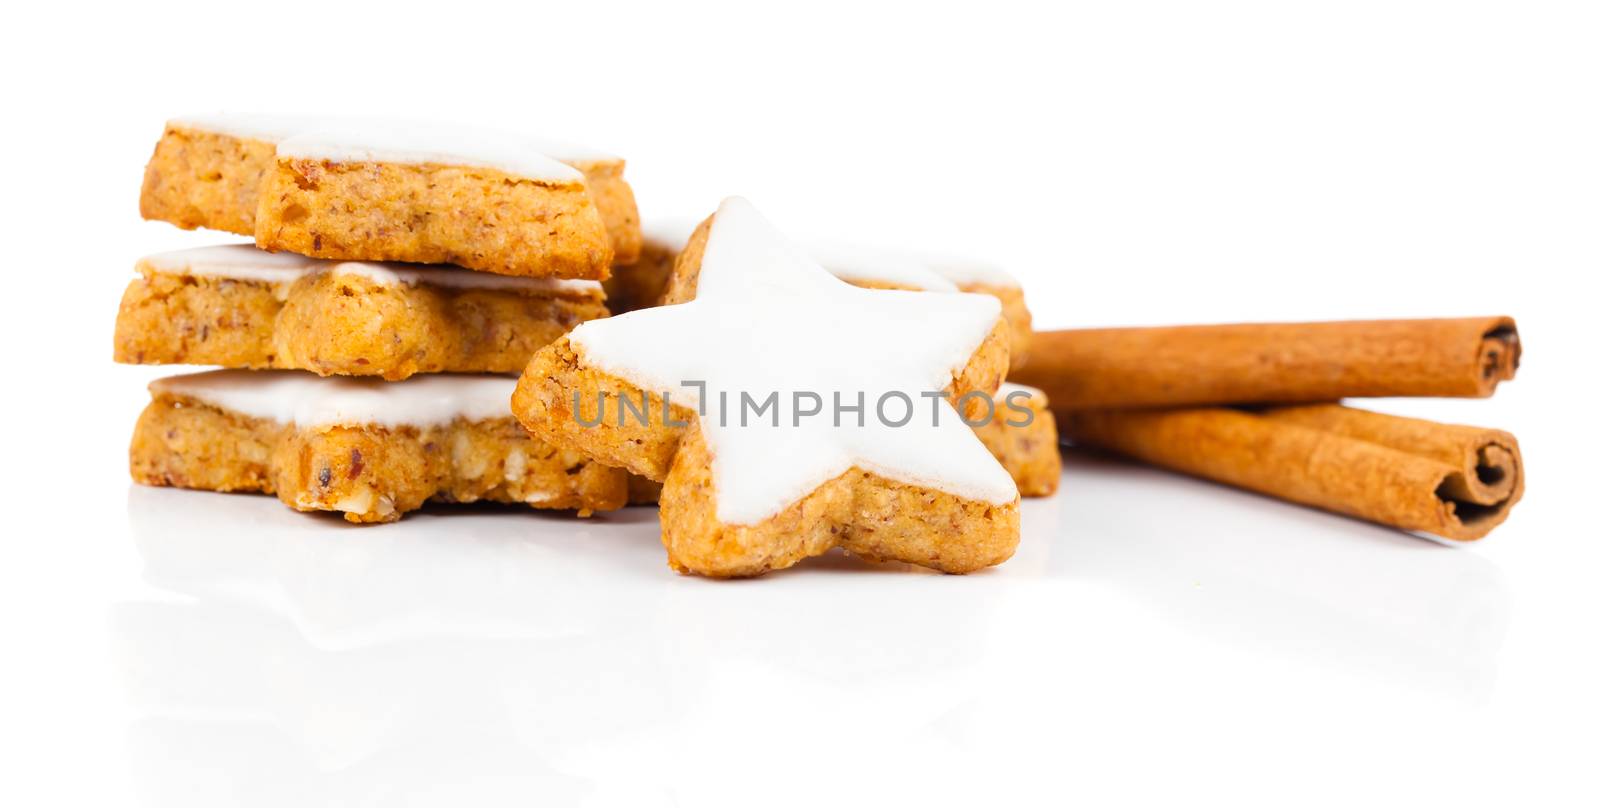 star shaped cinnamon biscuit and cinnamon sticks on white backgr by motorolka